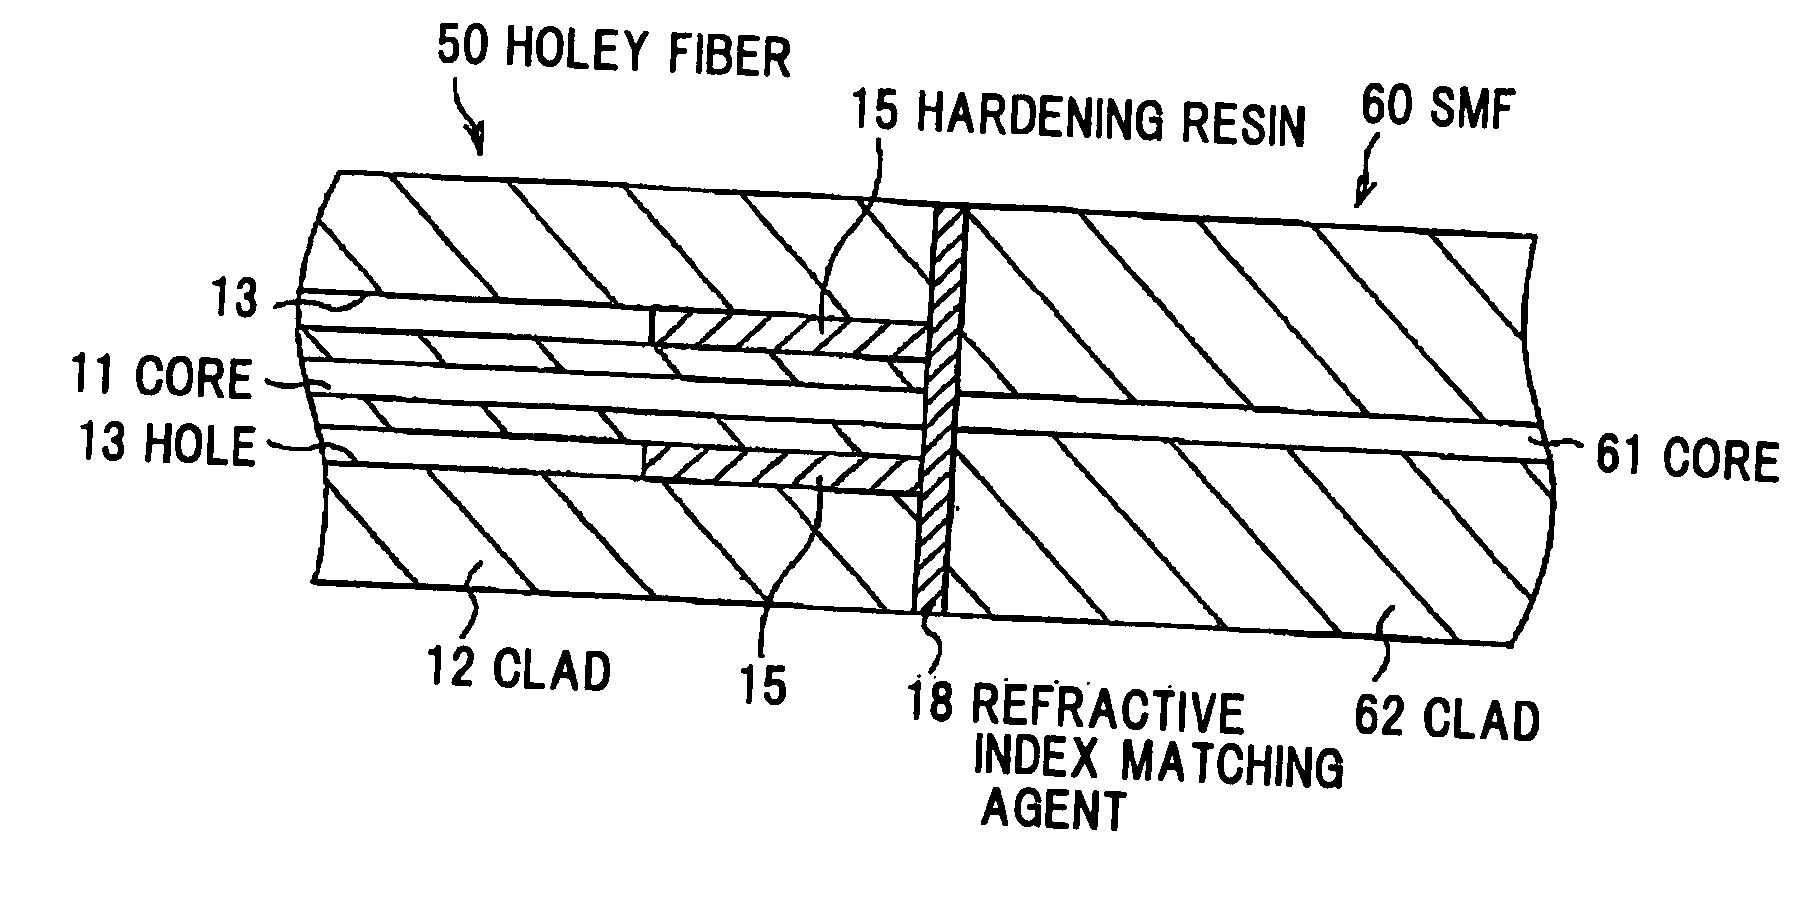 Optical fiber, sealing method for optical fiber end face, connection structure of optical fiber, and optical connector